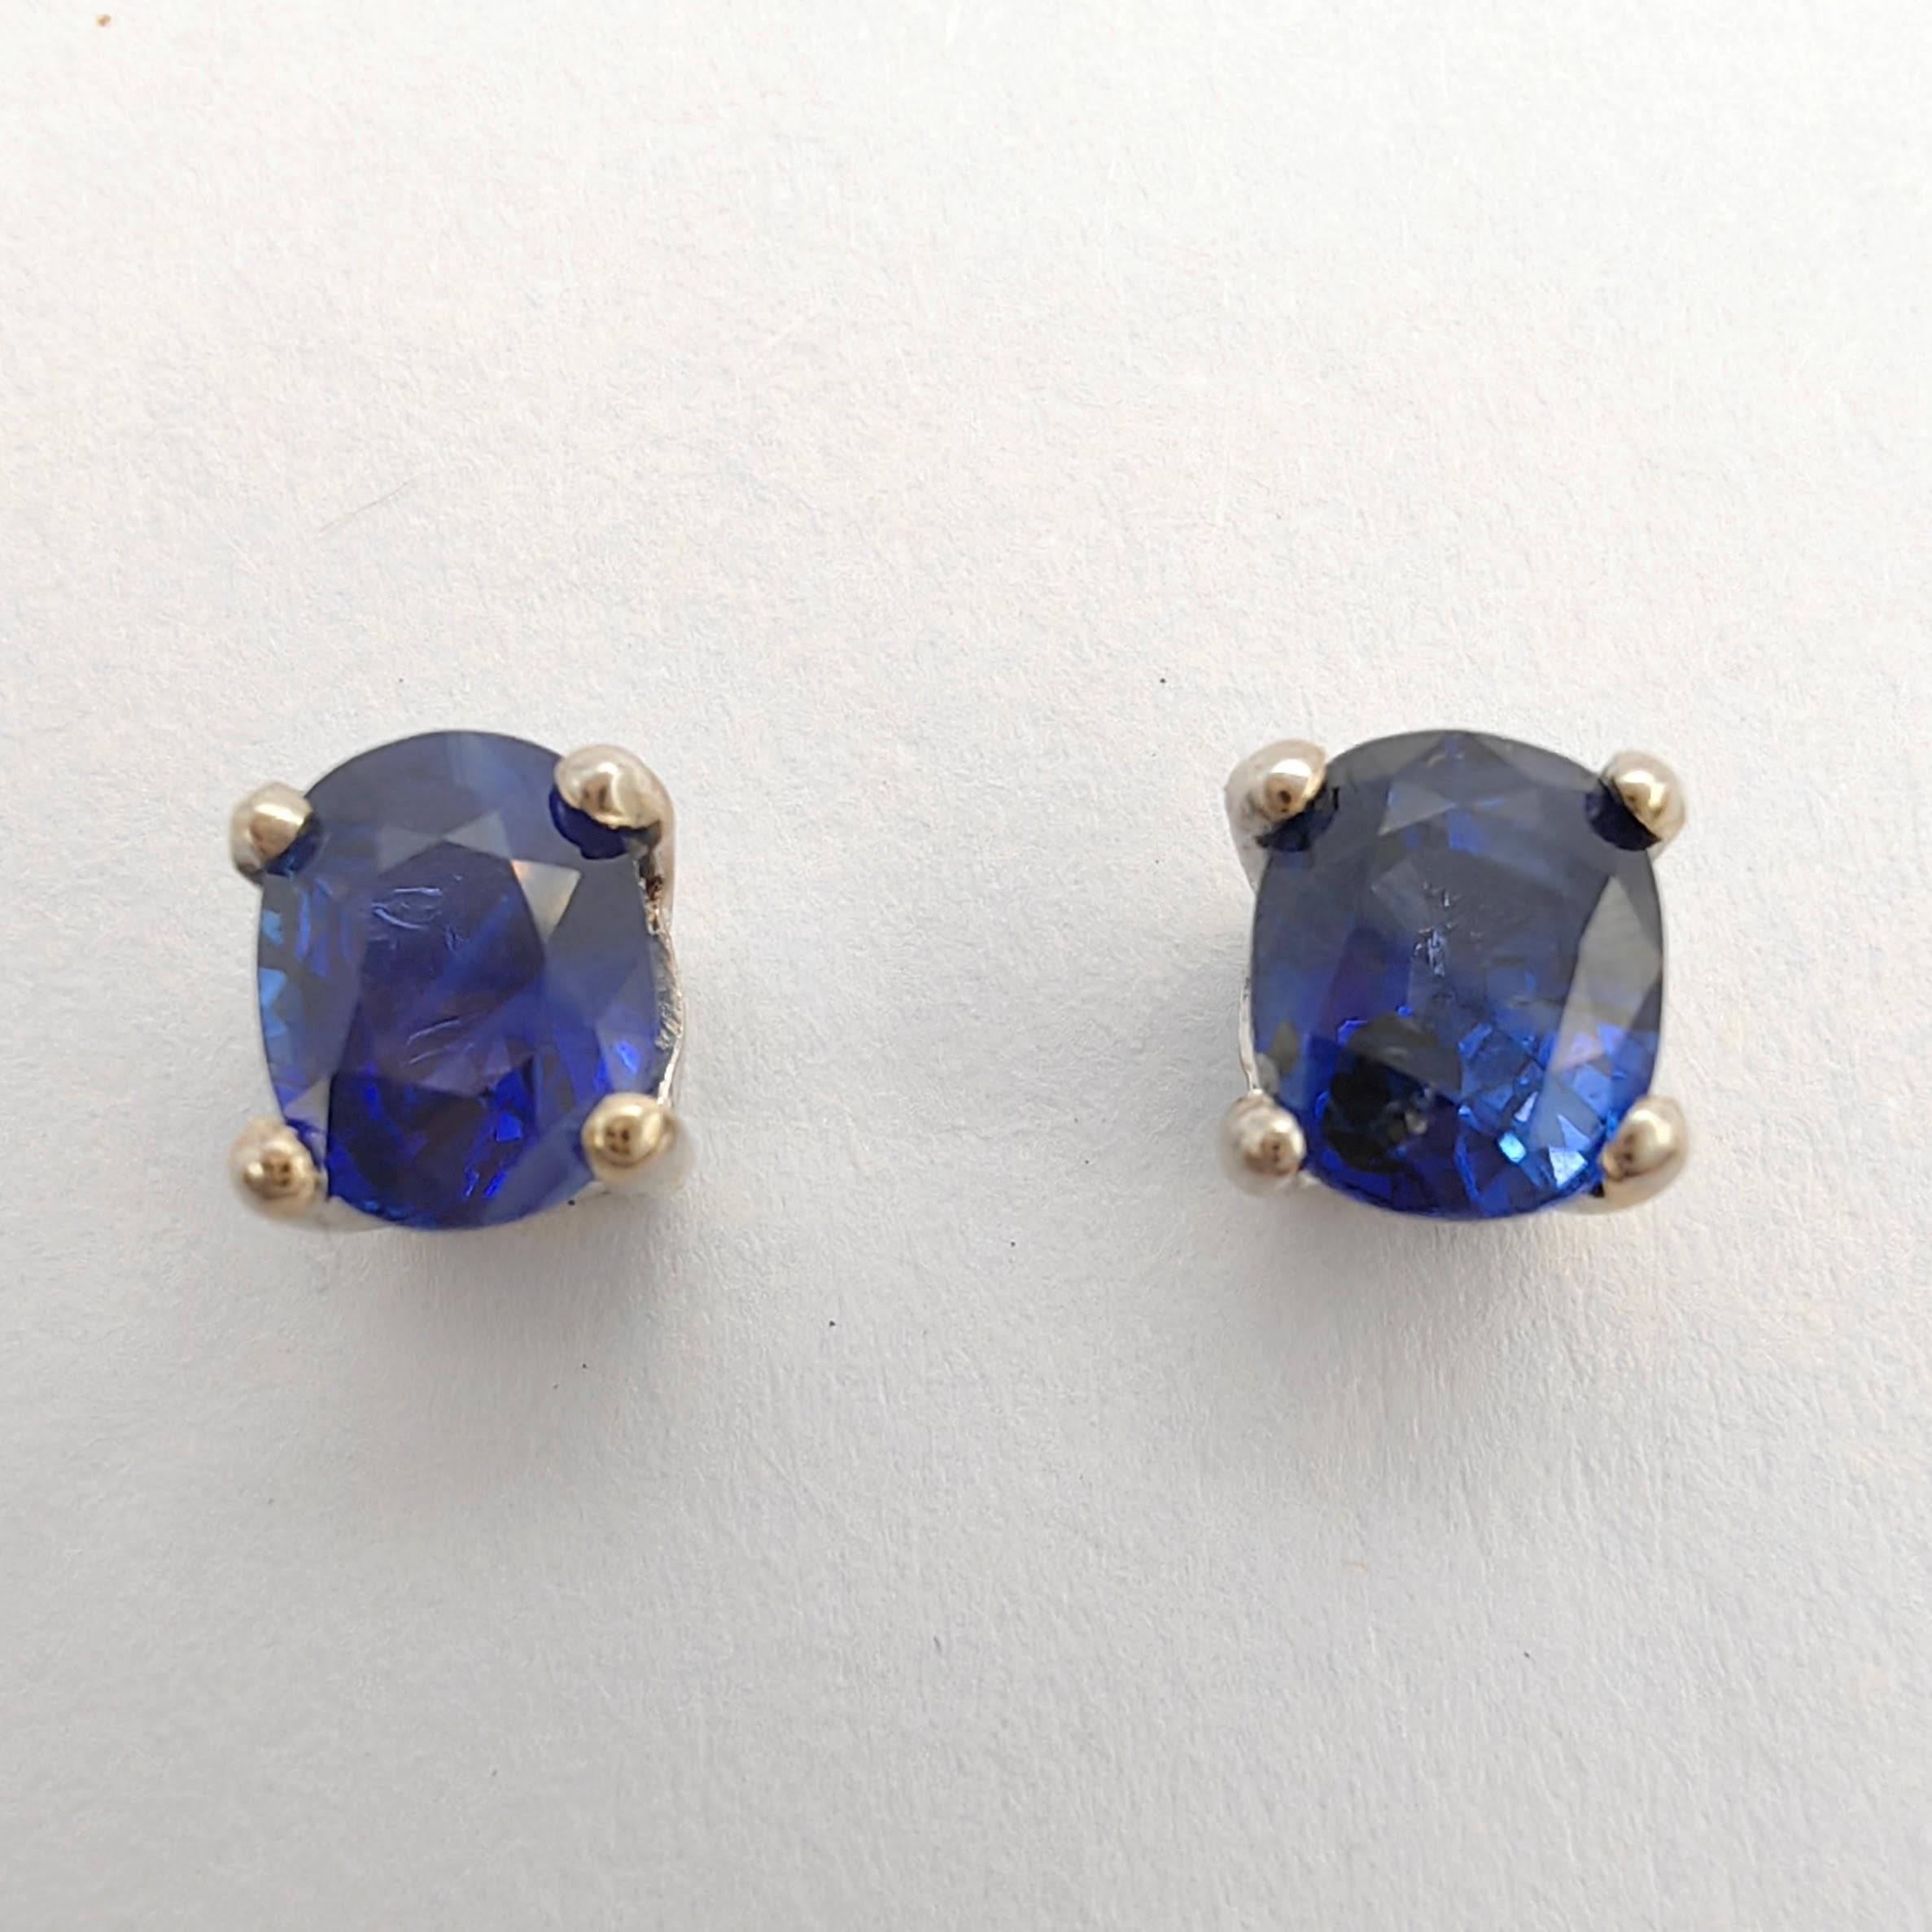 Contemporary 1.04ct Oval-cut Sapphire Studs & Diamond Jacket Earrings in 18K White Gold For Sale